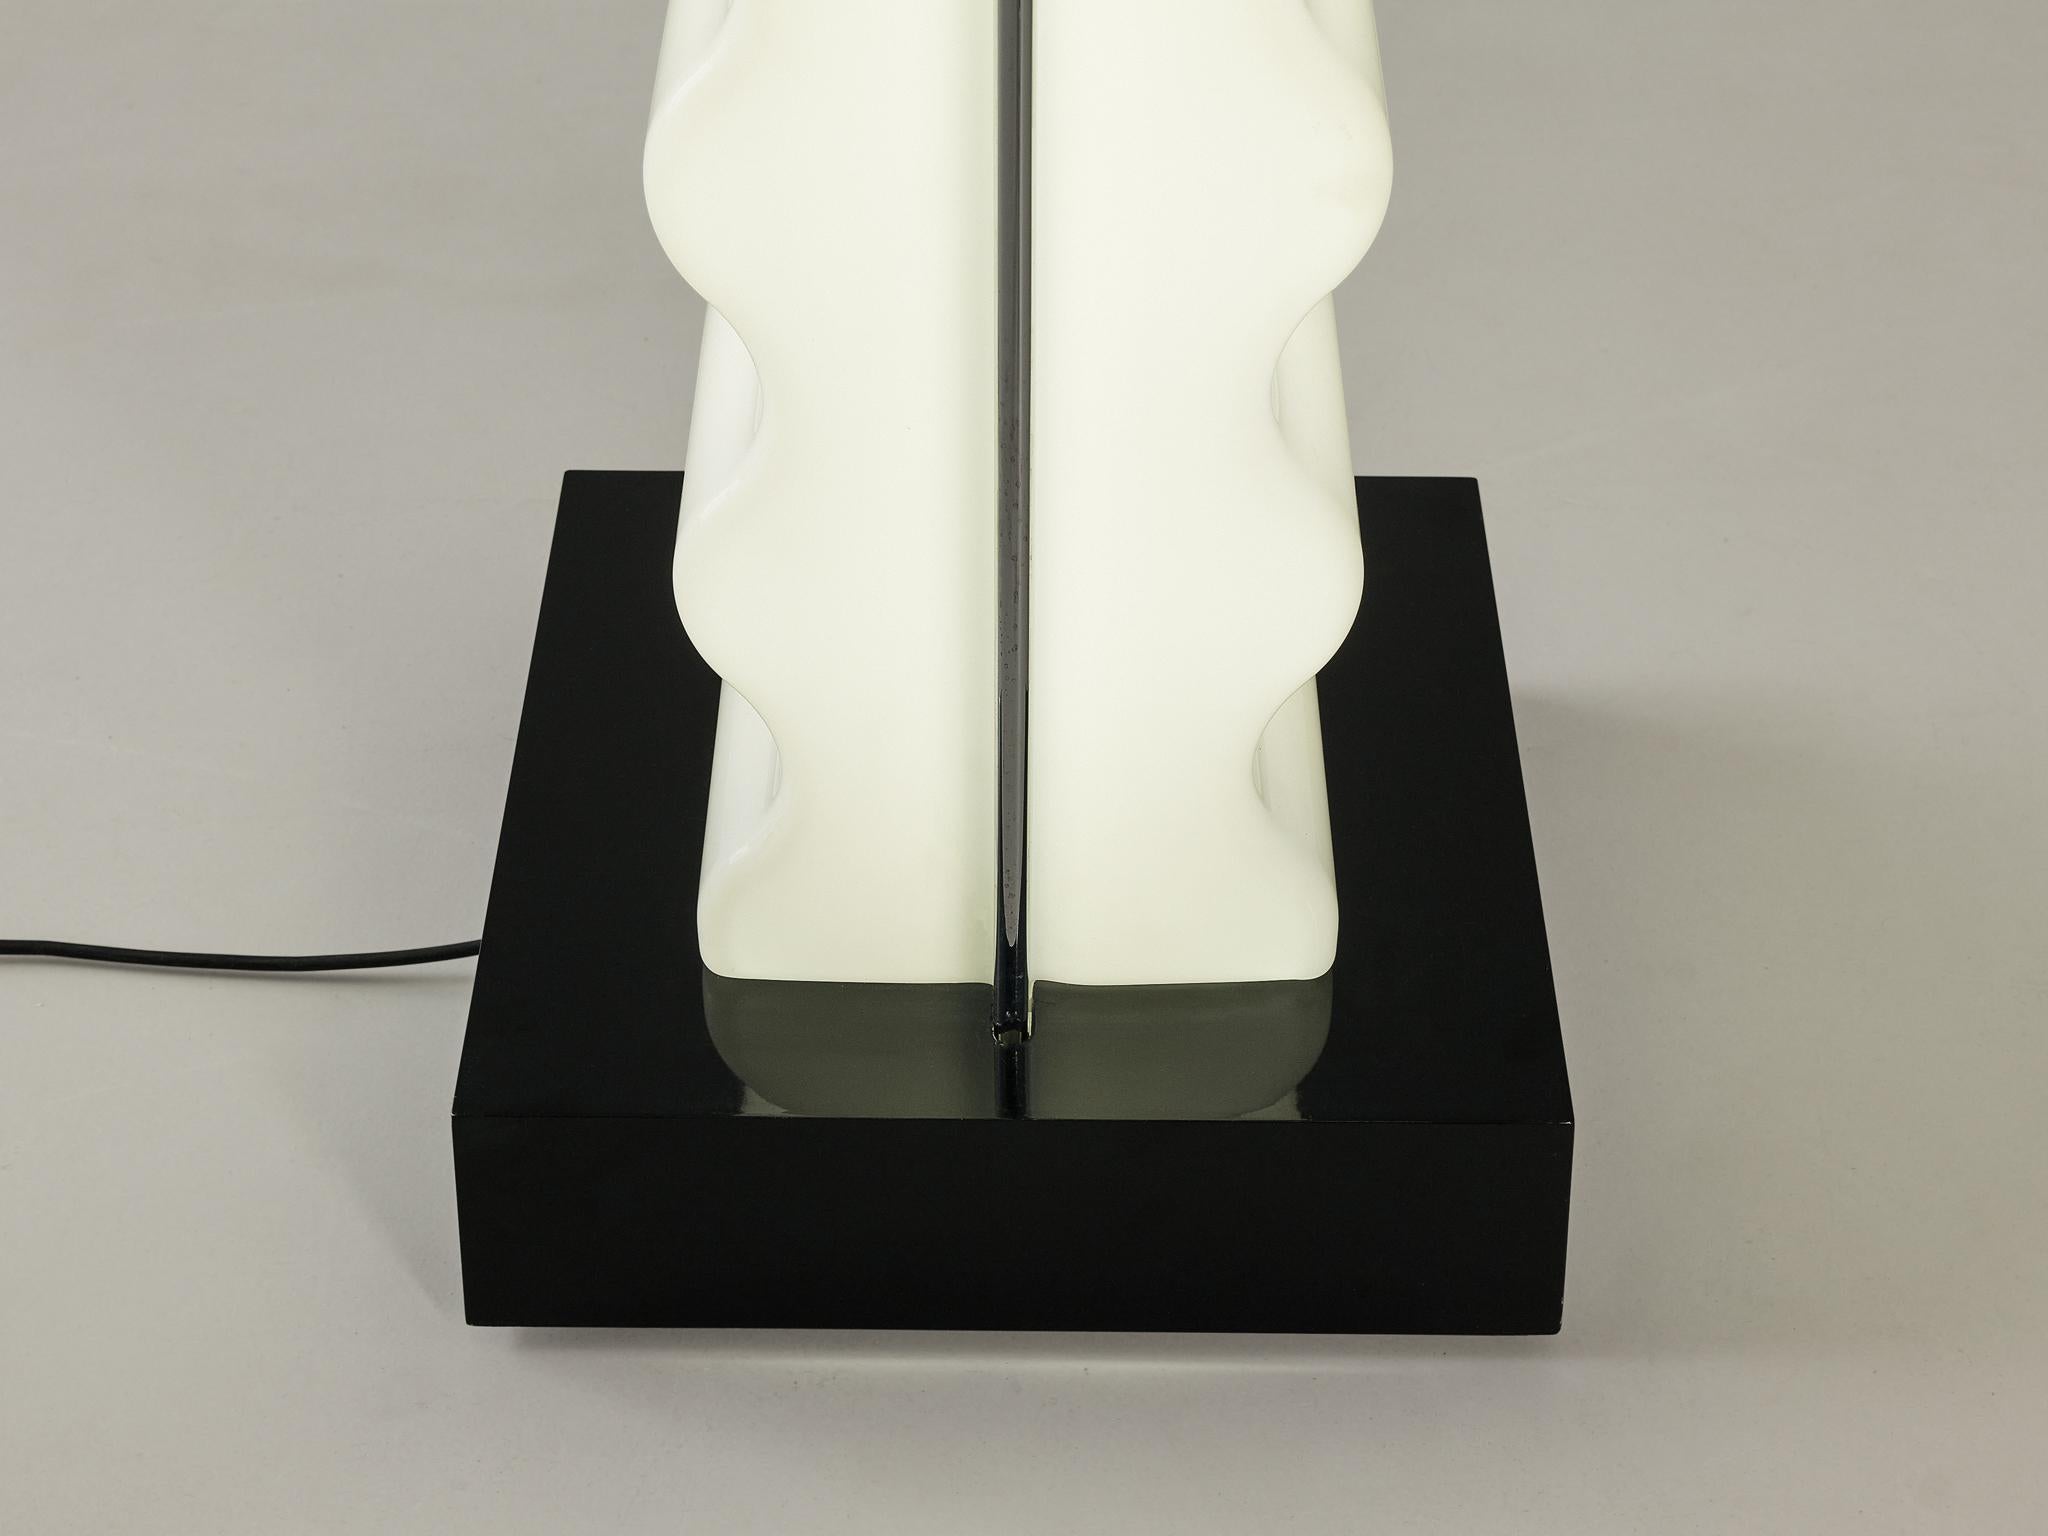 Ettore Sottsass for Poltronova 'Cometa' Floor Lamp in Perspex and Aluminum  For Sale 1